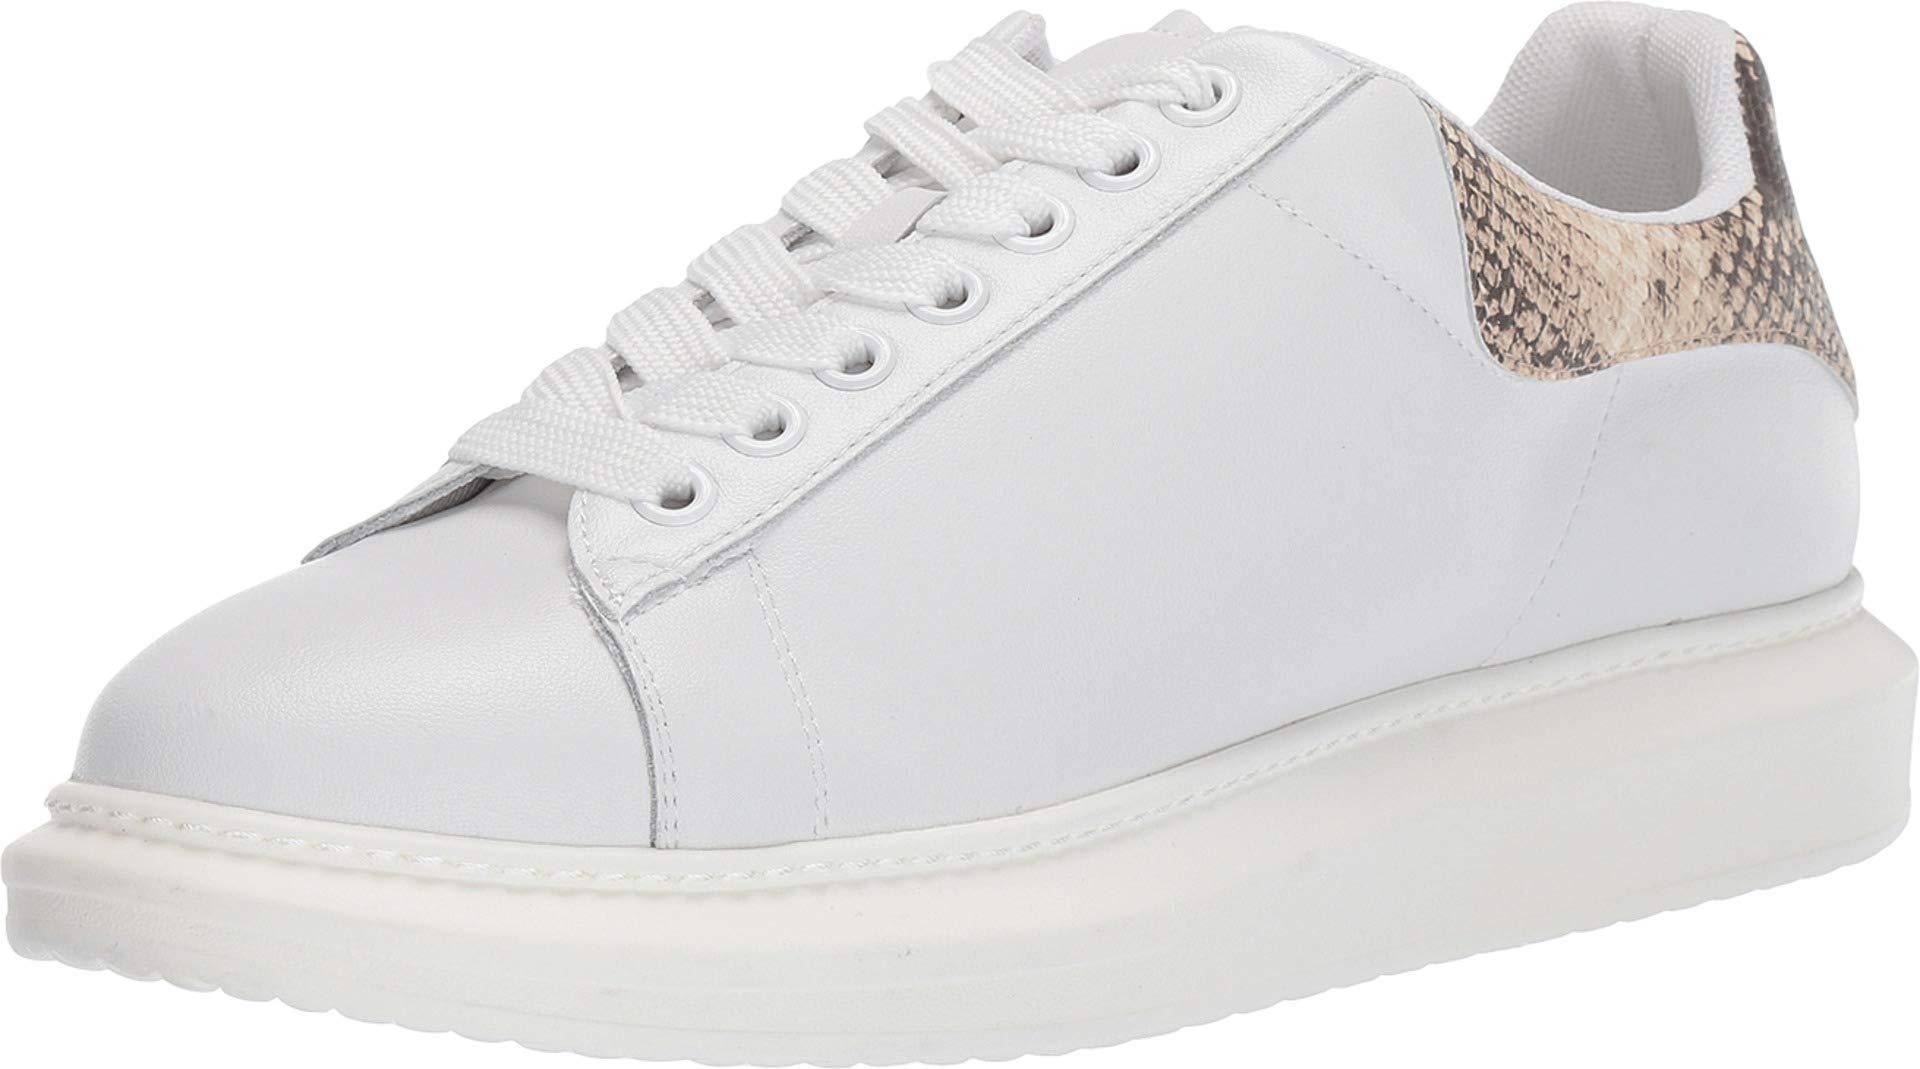 Steve Madden Leather Frosted in White for Men - Lyst